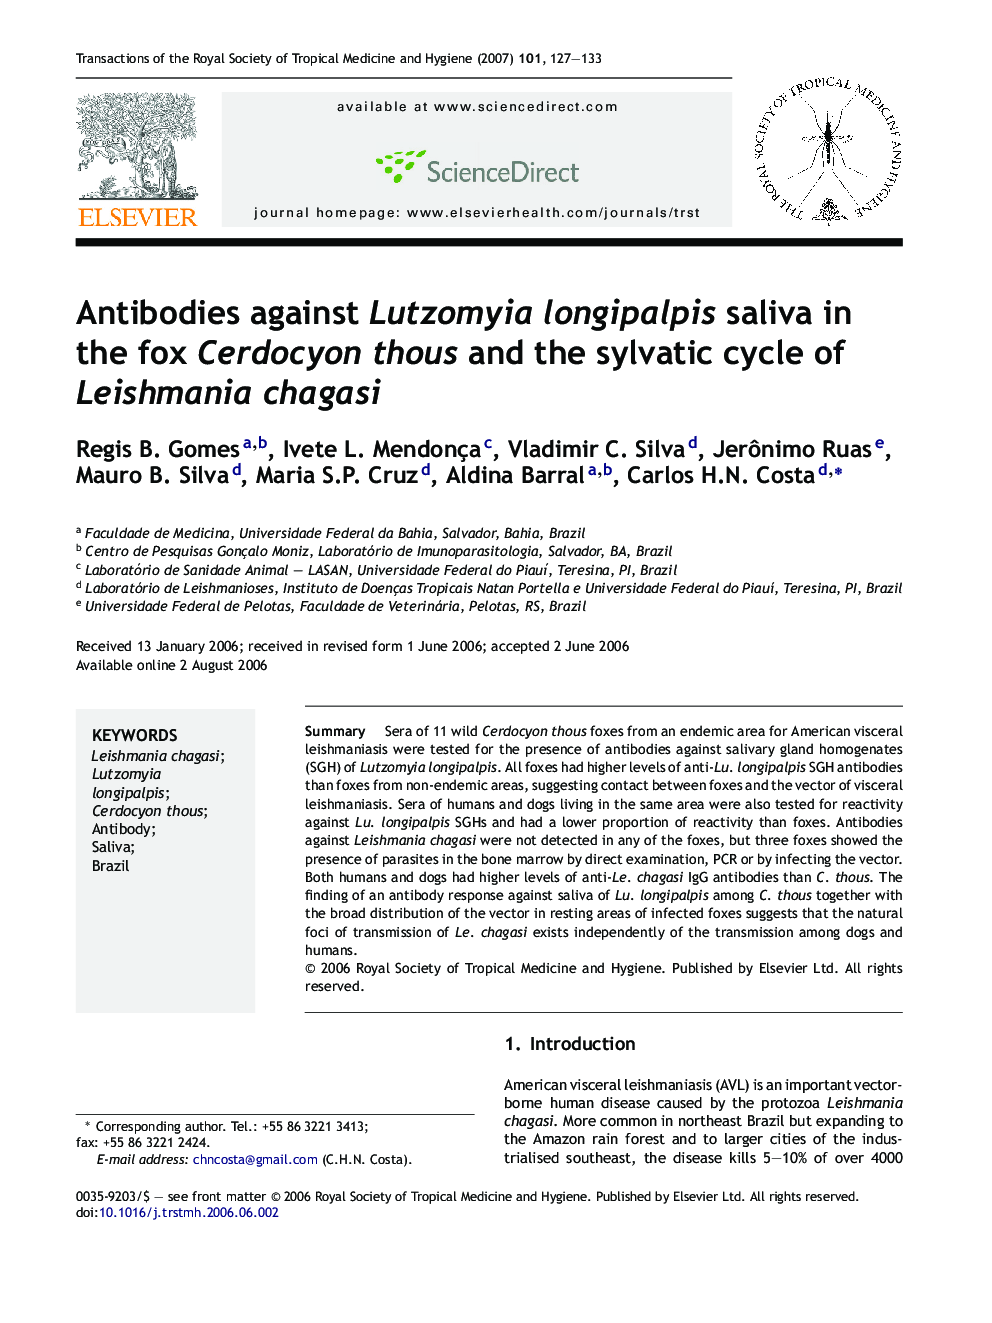 Antibodies against Lutzomyia longipalpis saliva in the fox Cerdocyon thous and the sylvatic cycle of Leishmania chagasi